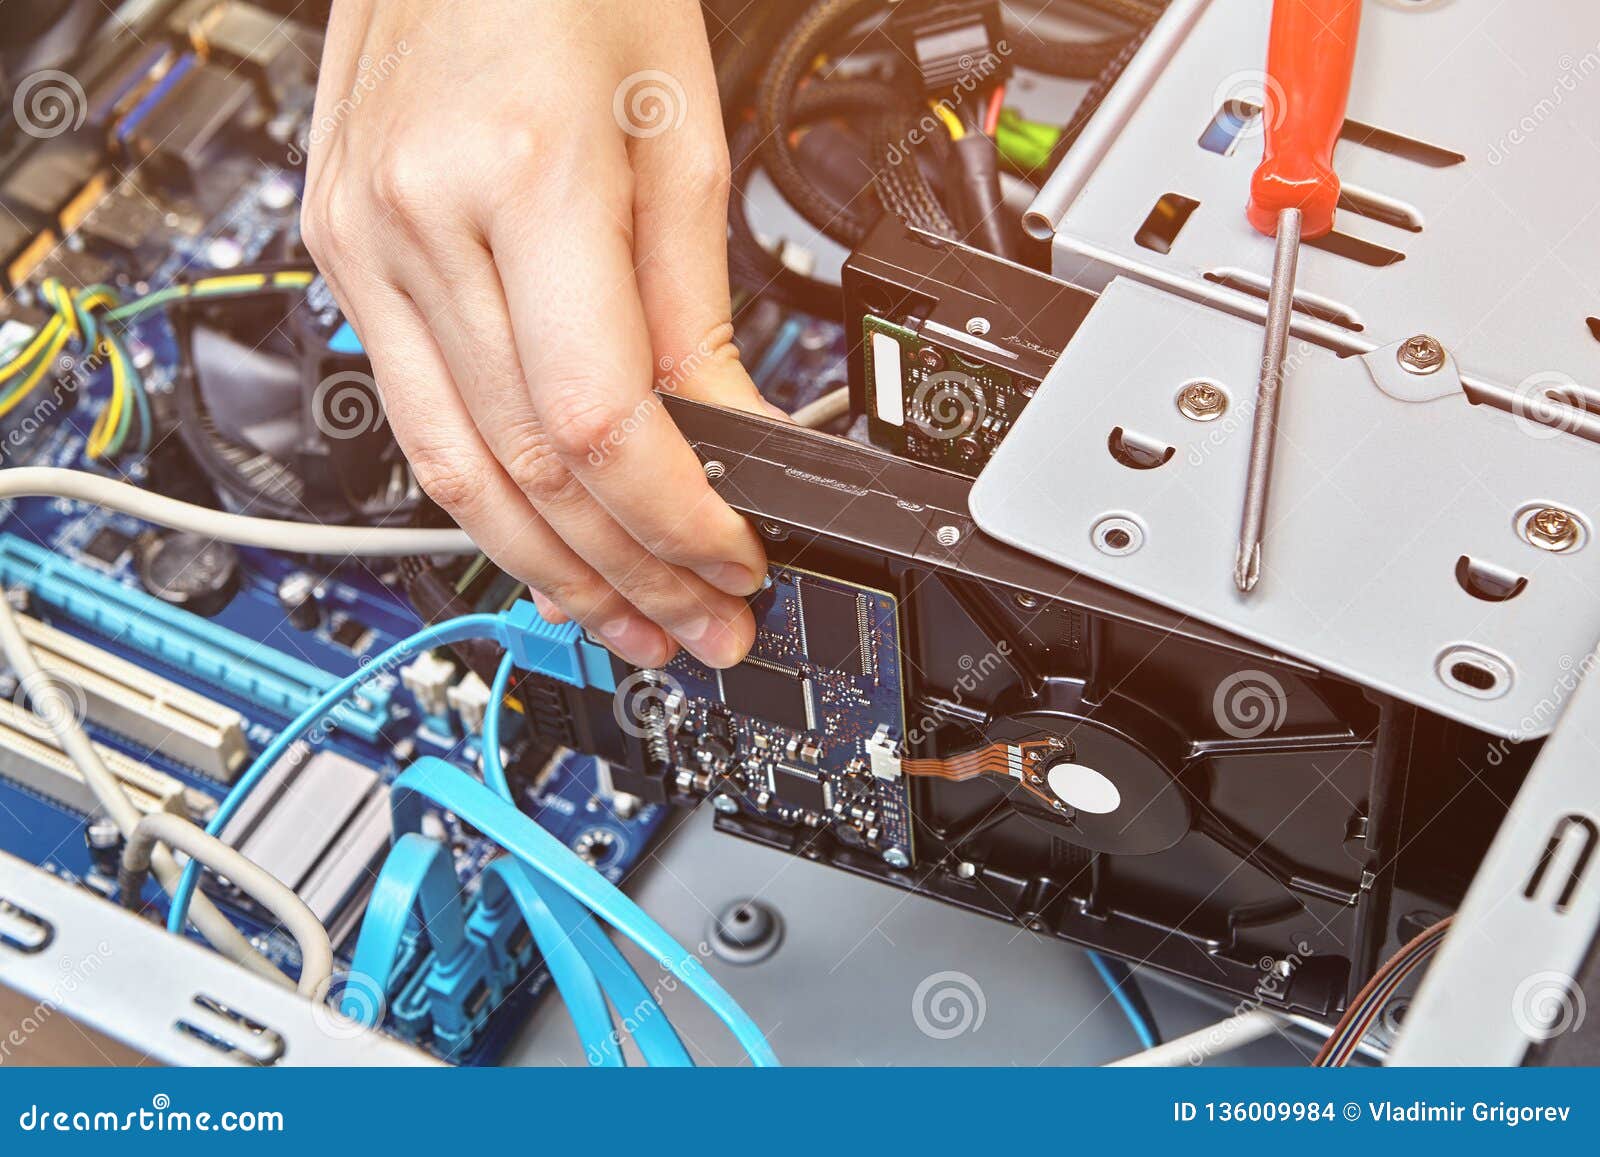 install operating system on new hard drive